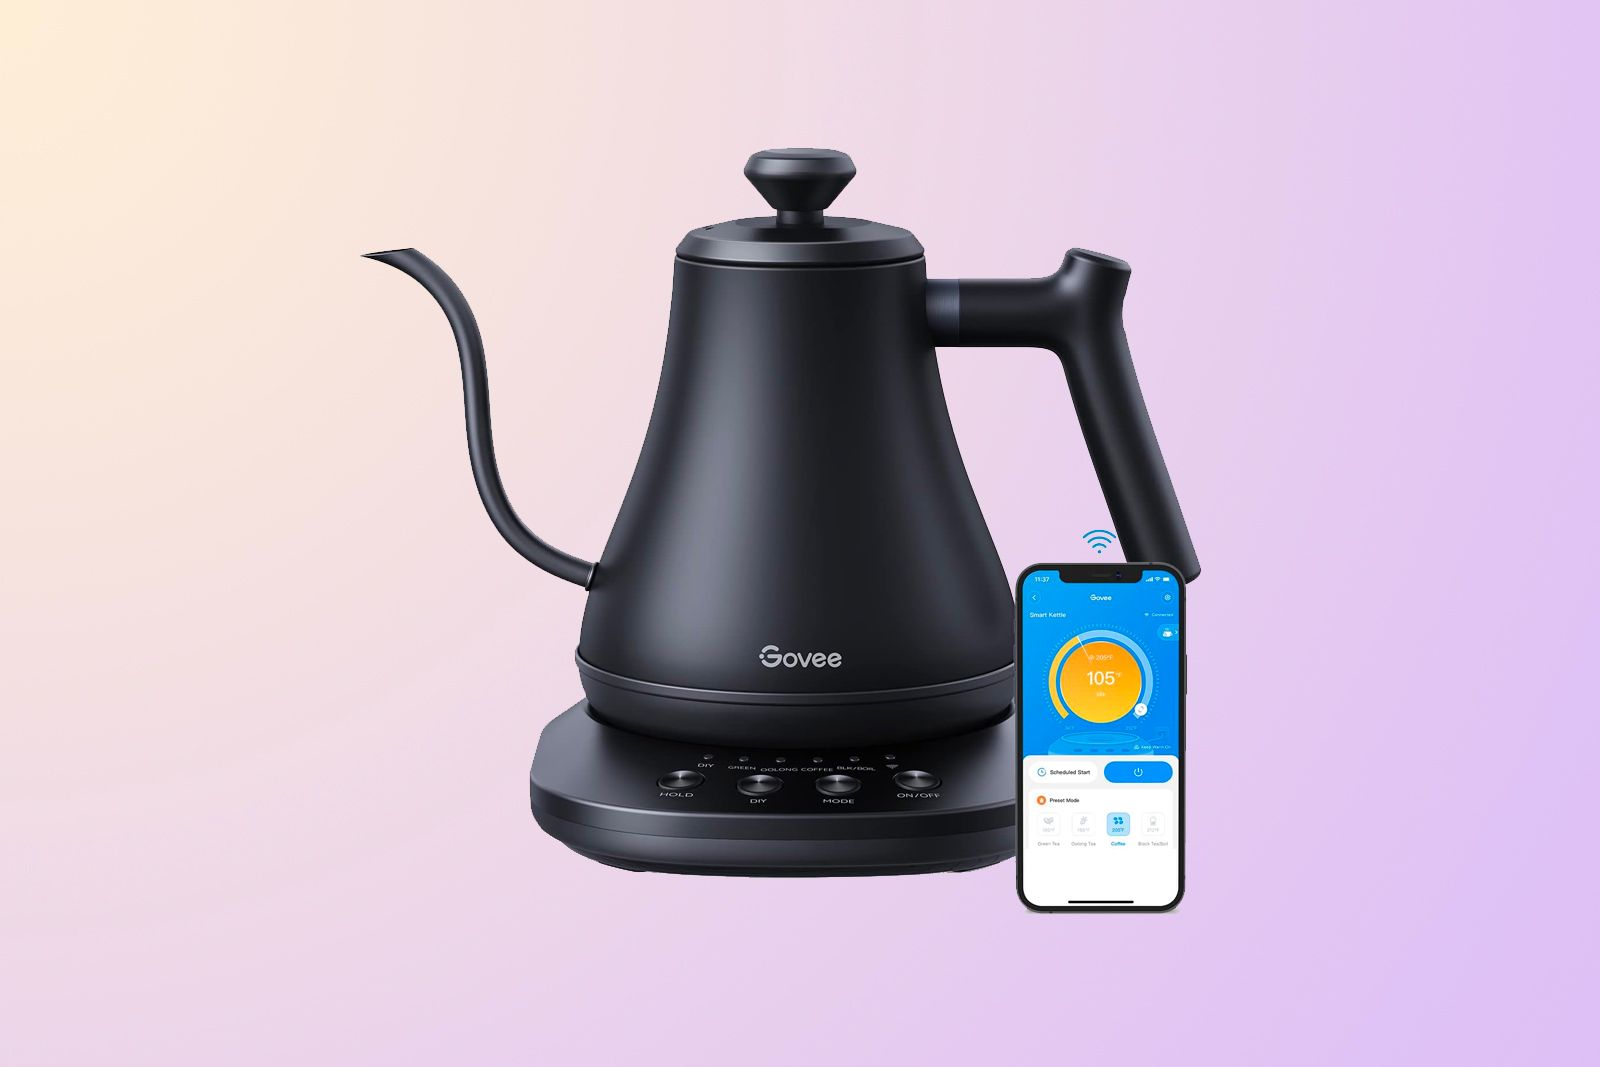 Govee's smart, voice-controlled Wi-Fi electric gooseneck kettle hits 2023  low at $59 (Reg. $80)